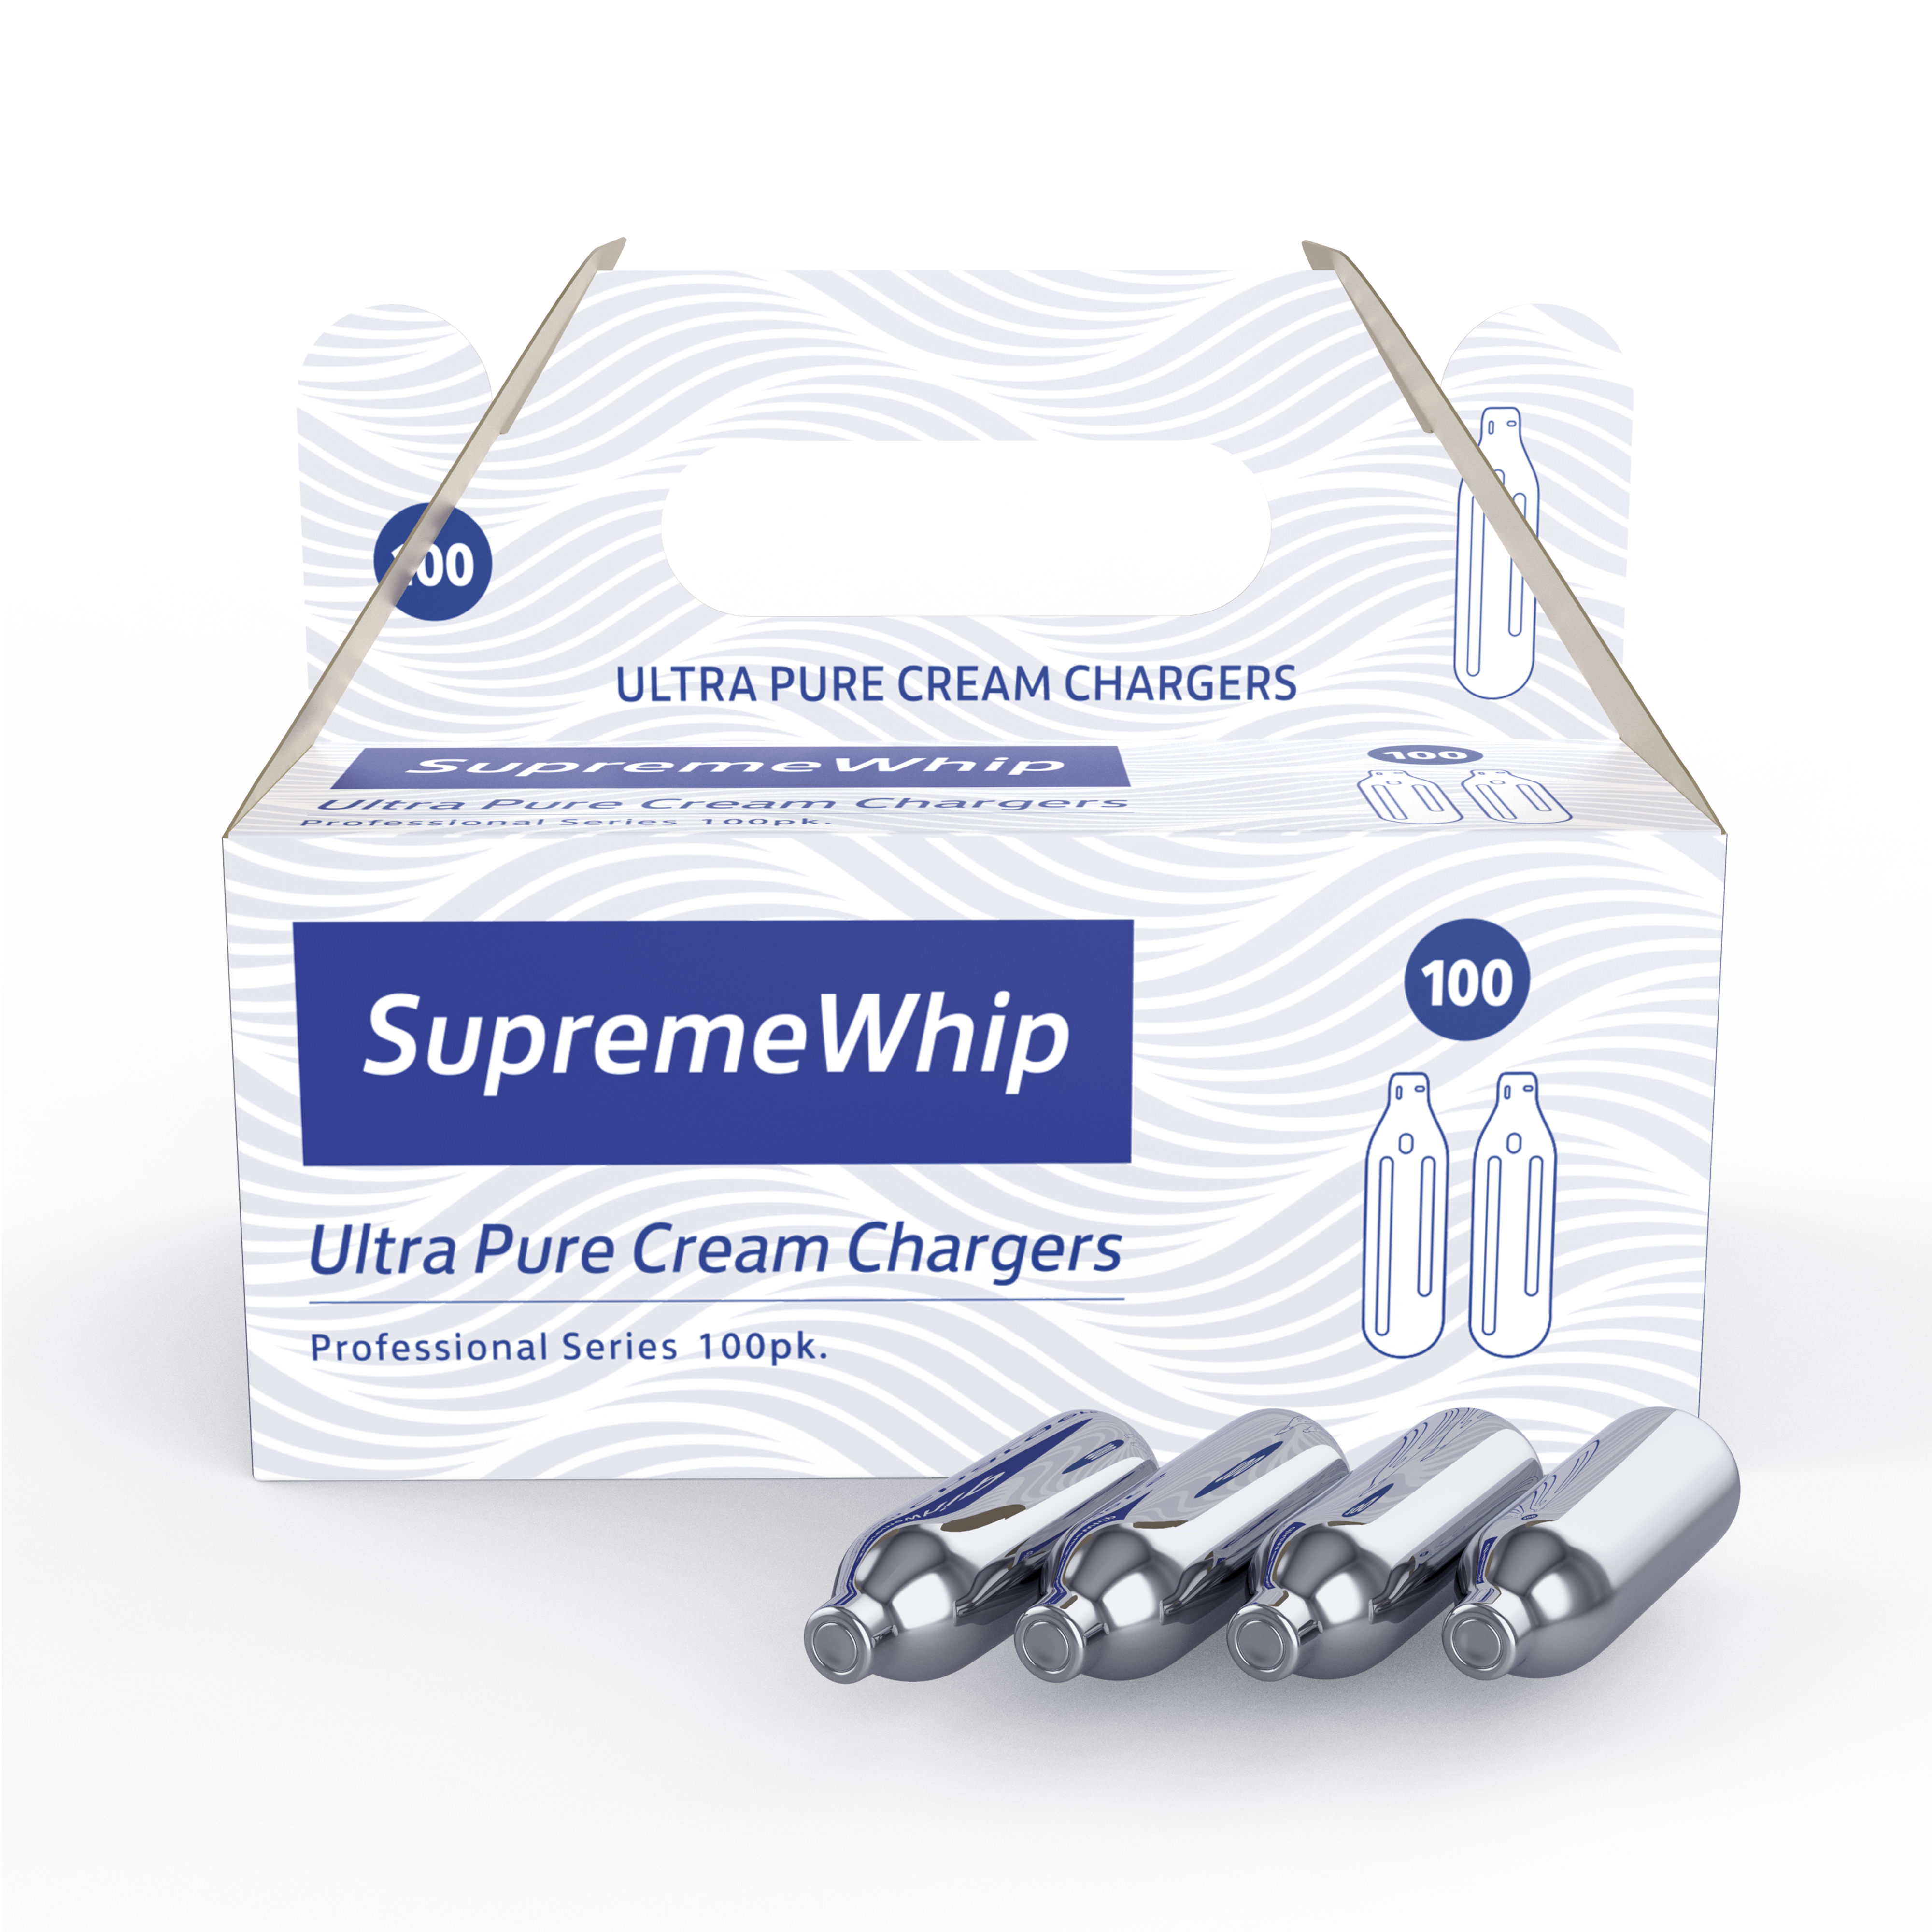 SupremeWhip Cream Chargers 8.2g in 100Pks - WHOLESALE